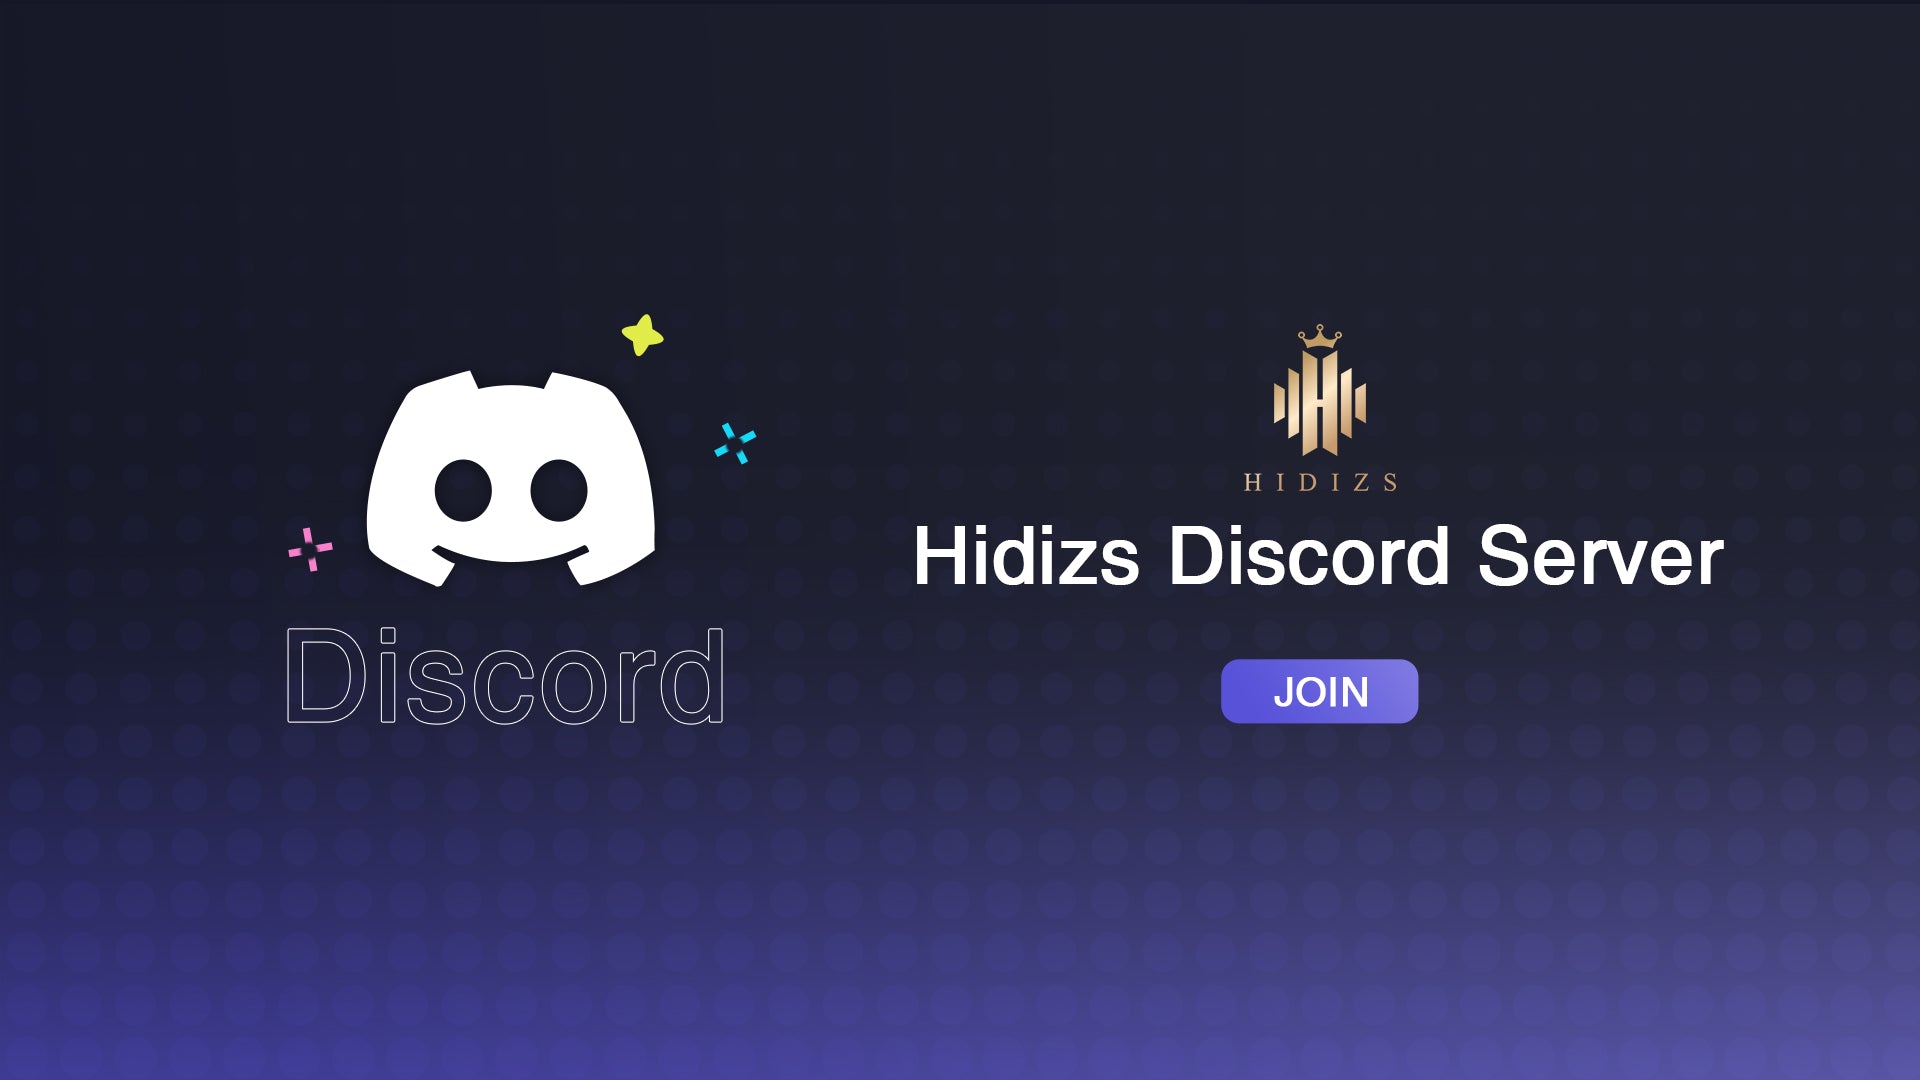 Join the Hidizs Discord